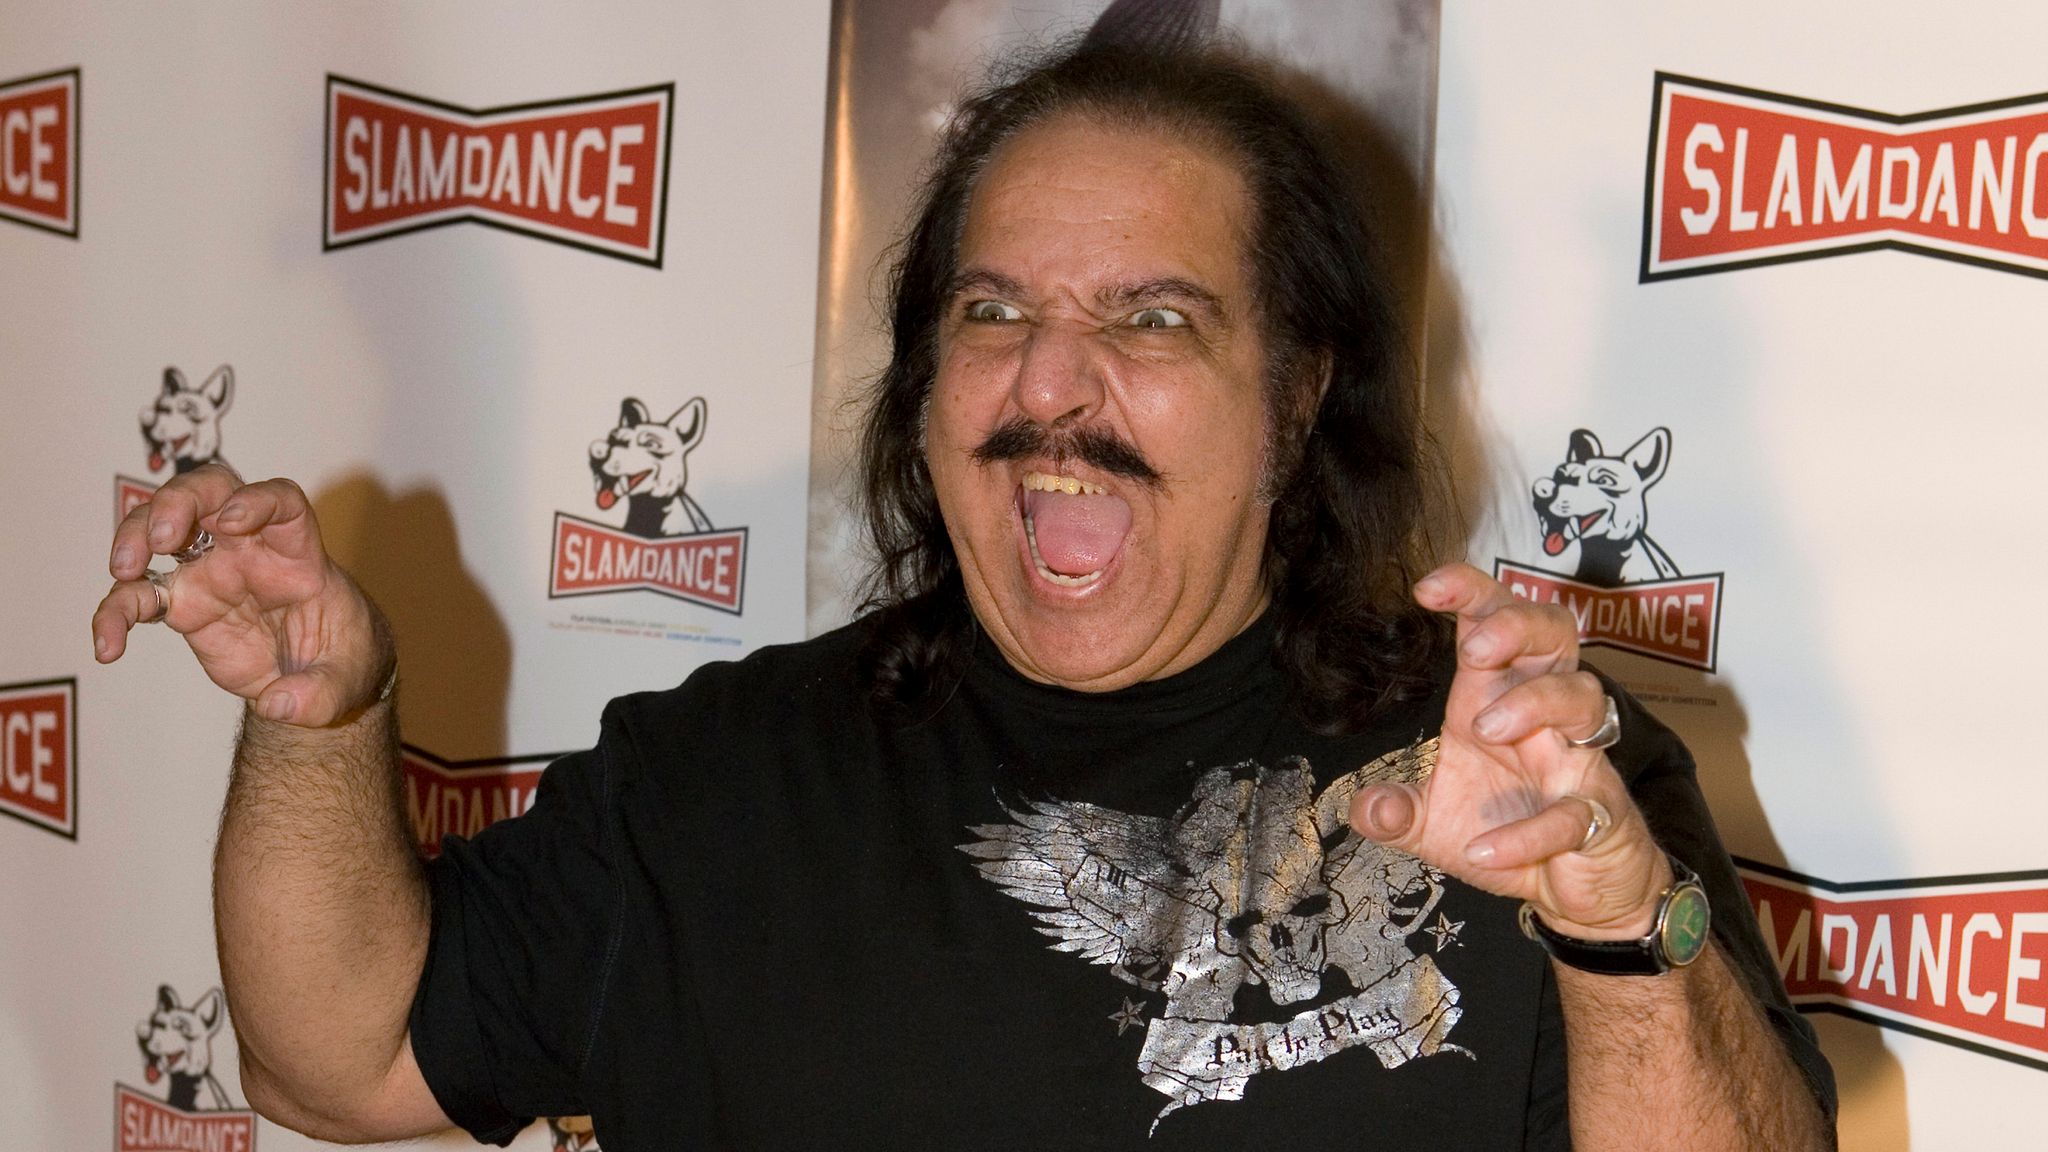 Ron Jeremy Porn Star Facing Further 20 Sexual Assault Charges On 13 Women And Girls Us News Sky News ron jeremy porn star facing further 20